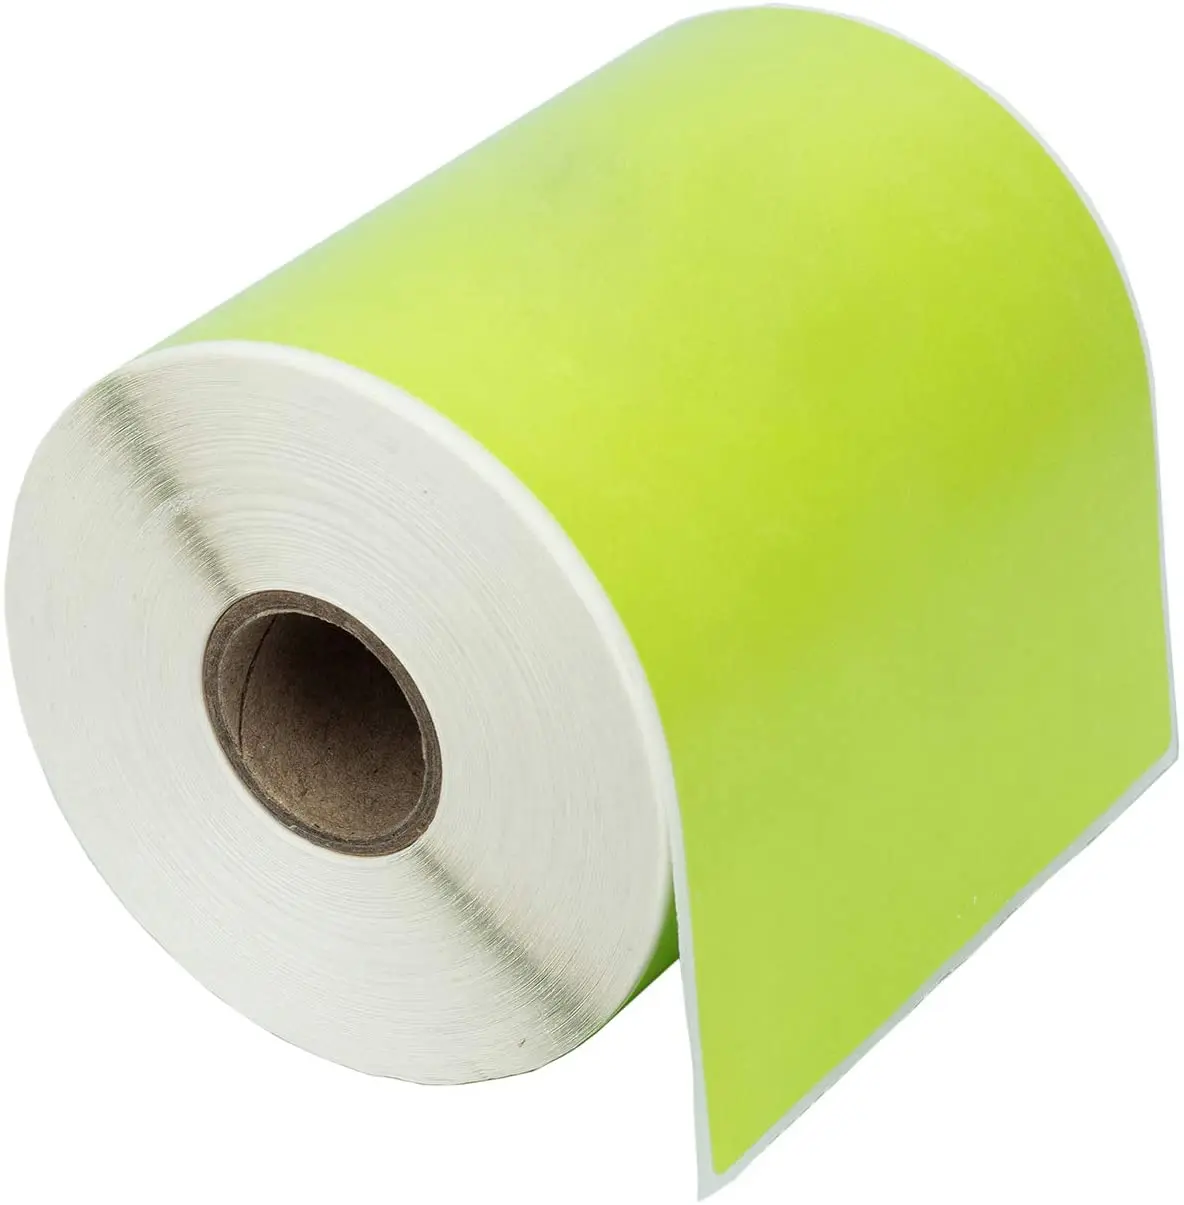 Thermal Labels 75*120 Thermal Mailing Address Paper Label Rolls